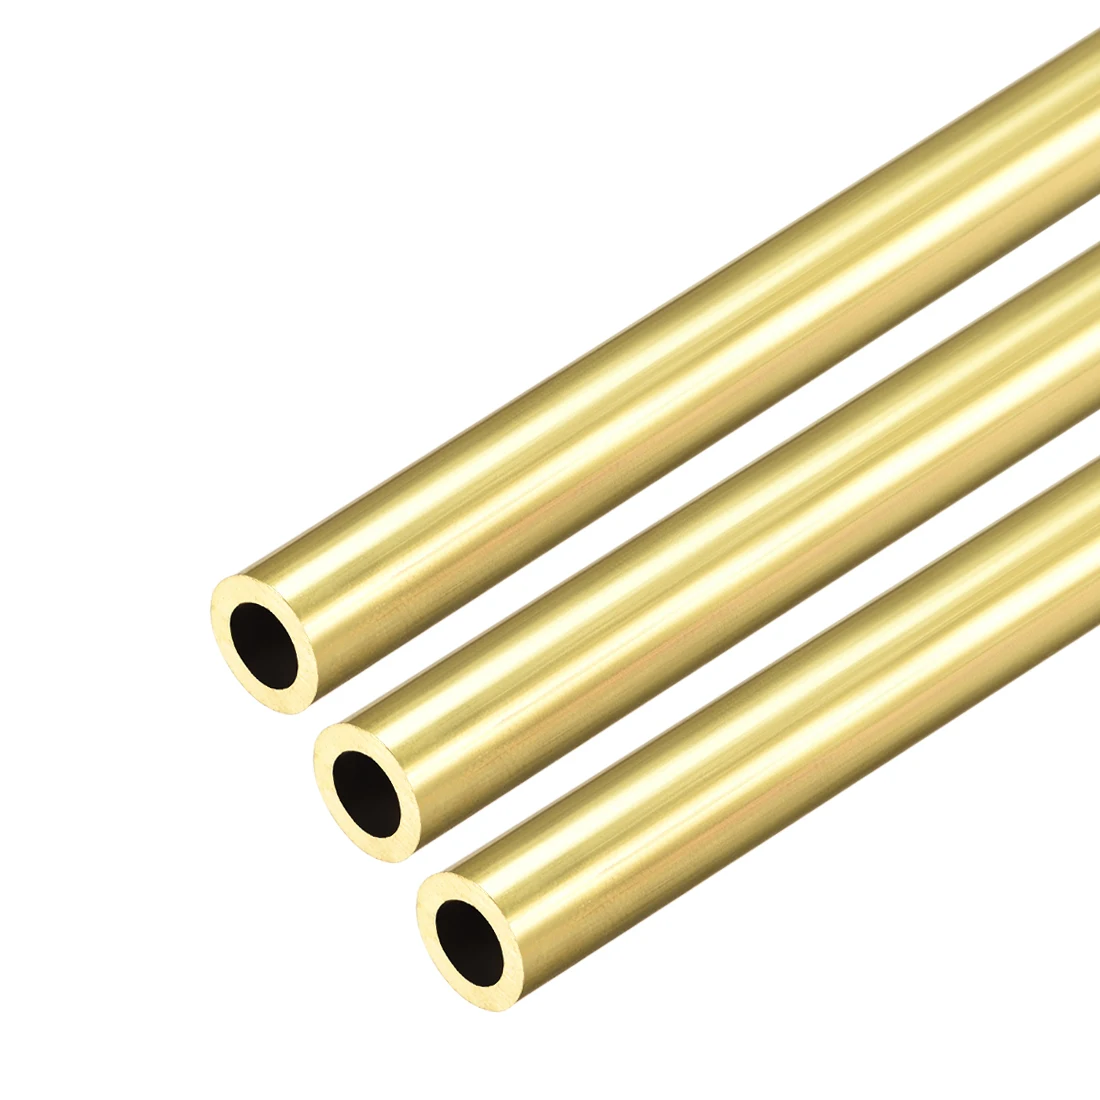 uxcell 4PCS 11mm x 12mm x 500mm Brass Pipe Tube Round Bar Rod for RC Boat 